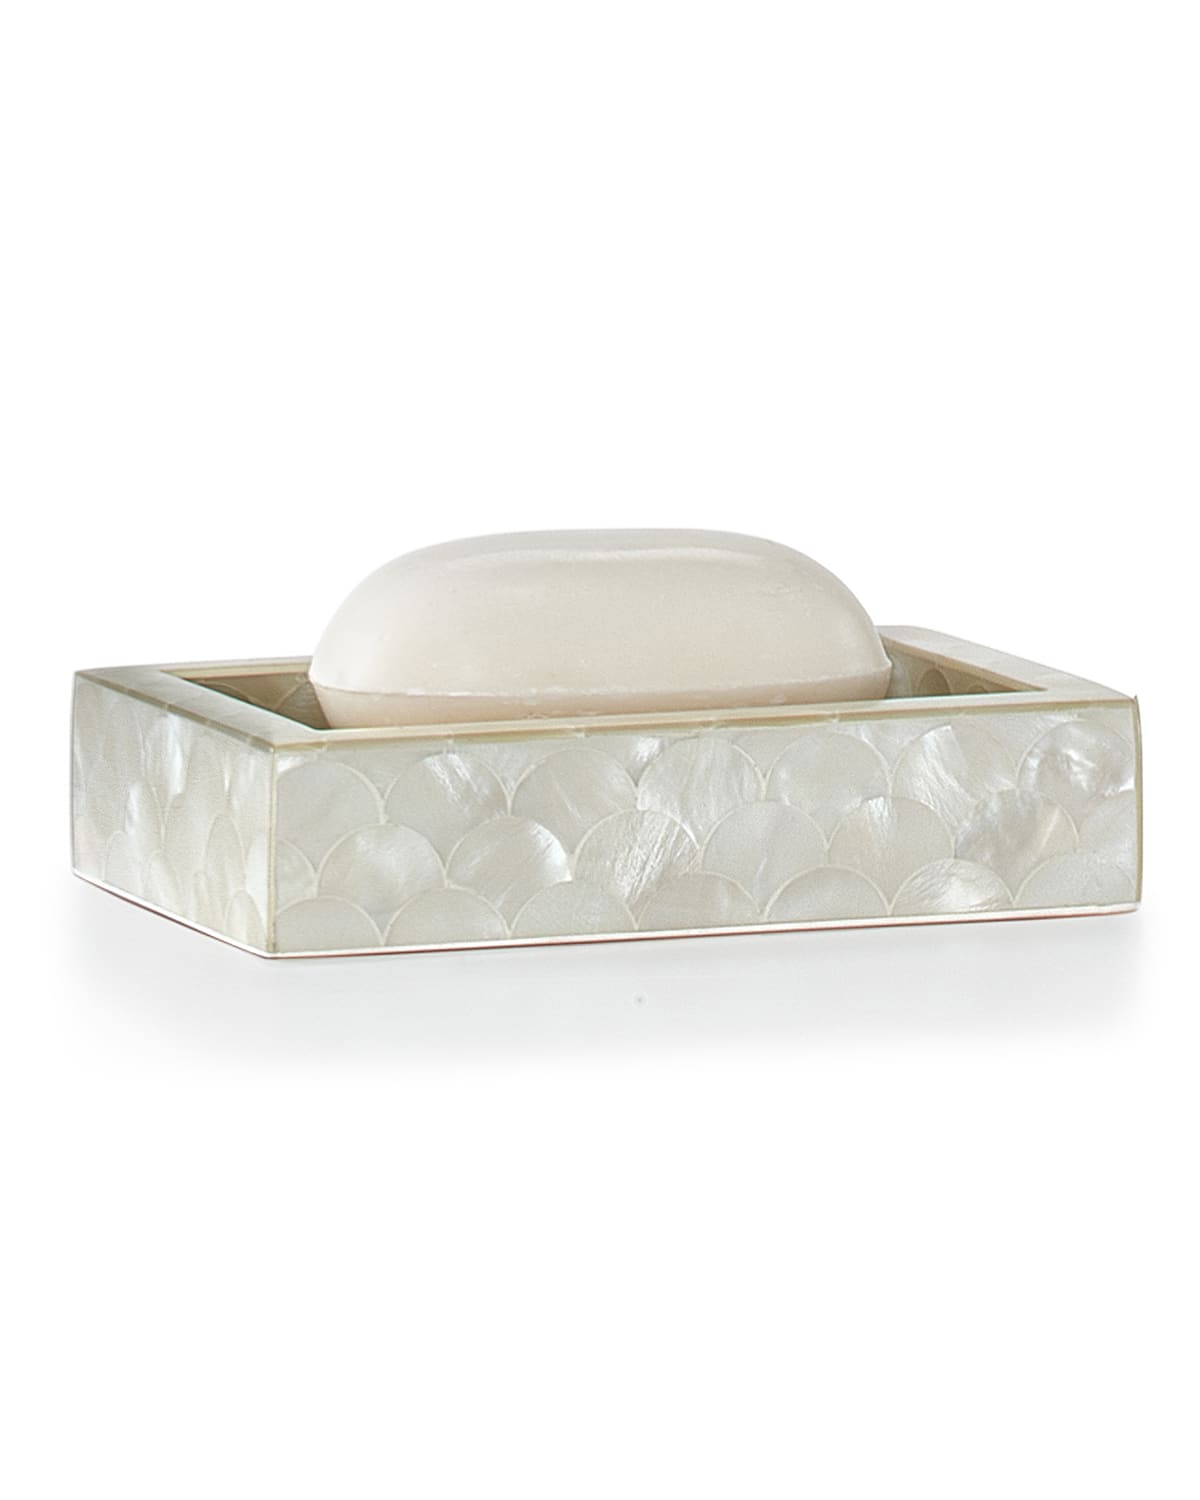 Labrazel Poisson Soap Dish In Oyster White